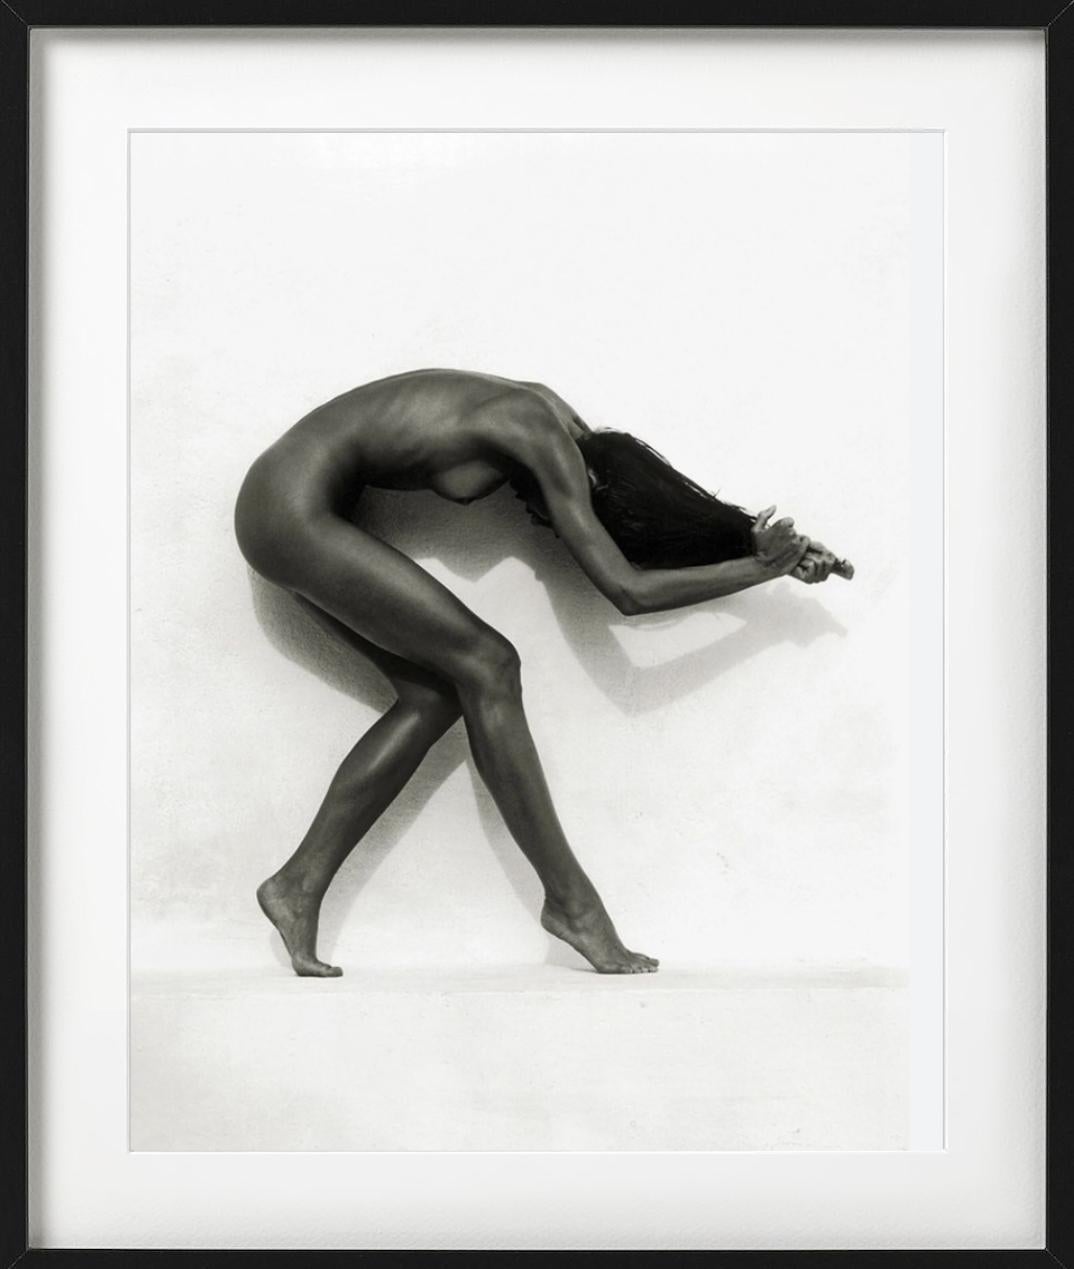 Ulrica, Mykonos - acrobatic nude, fine art photography - Photograph by Andreas H. Bitesnich